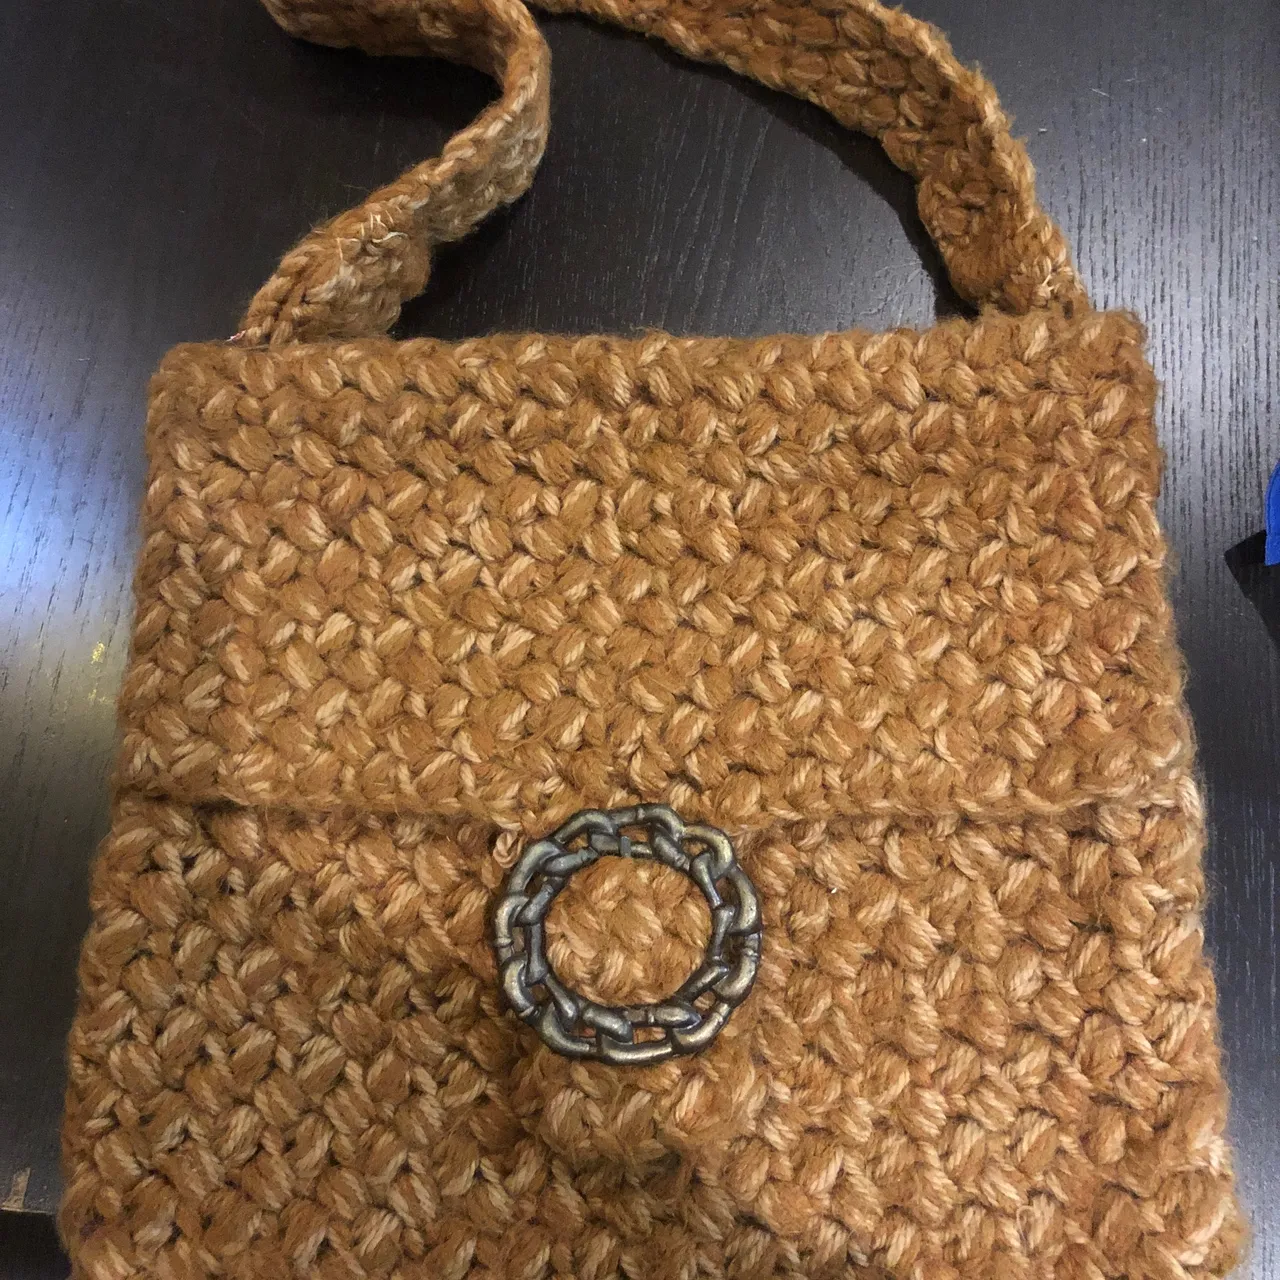 Chunky knitted bag photo 1